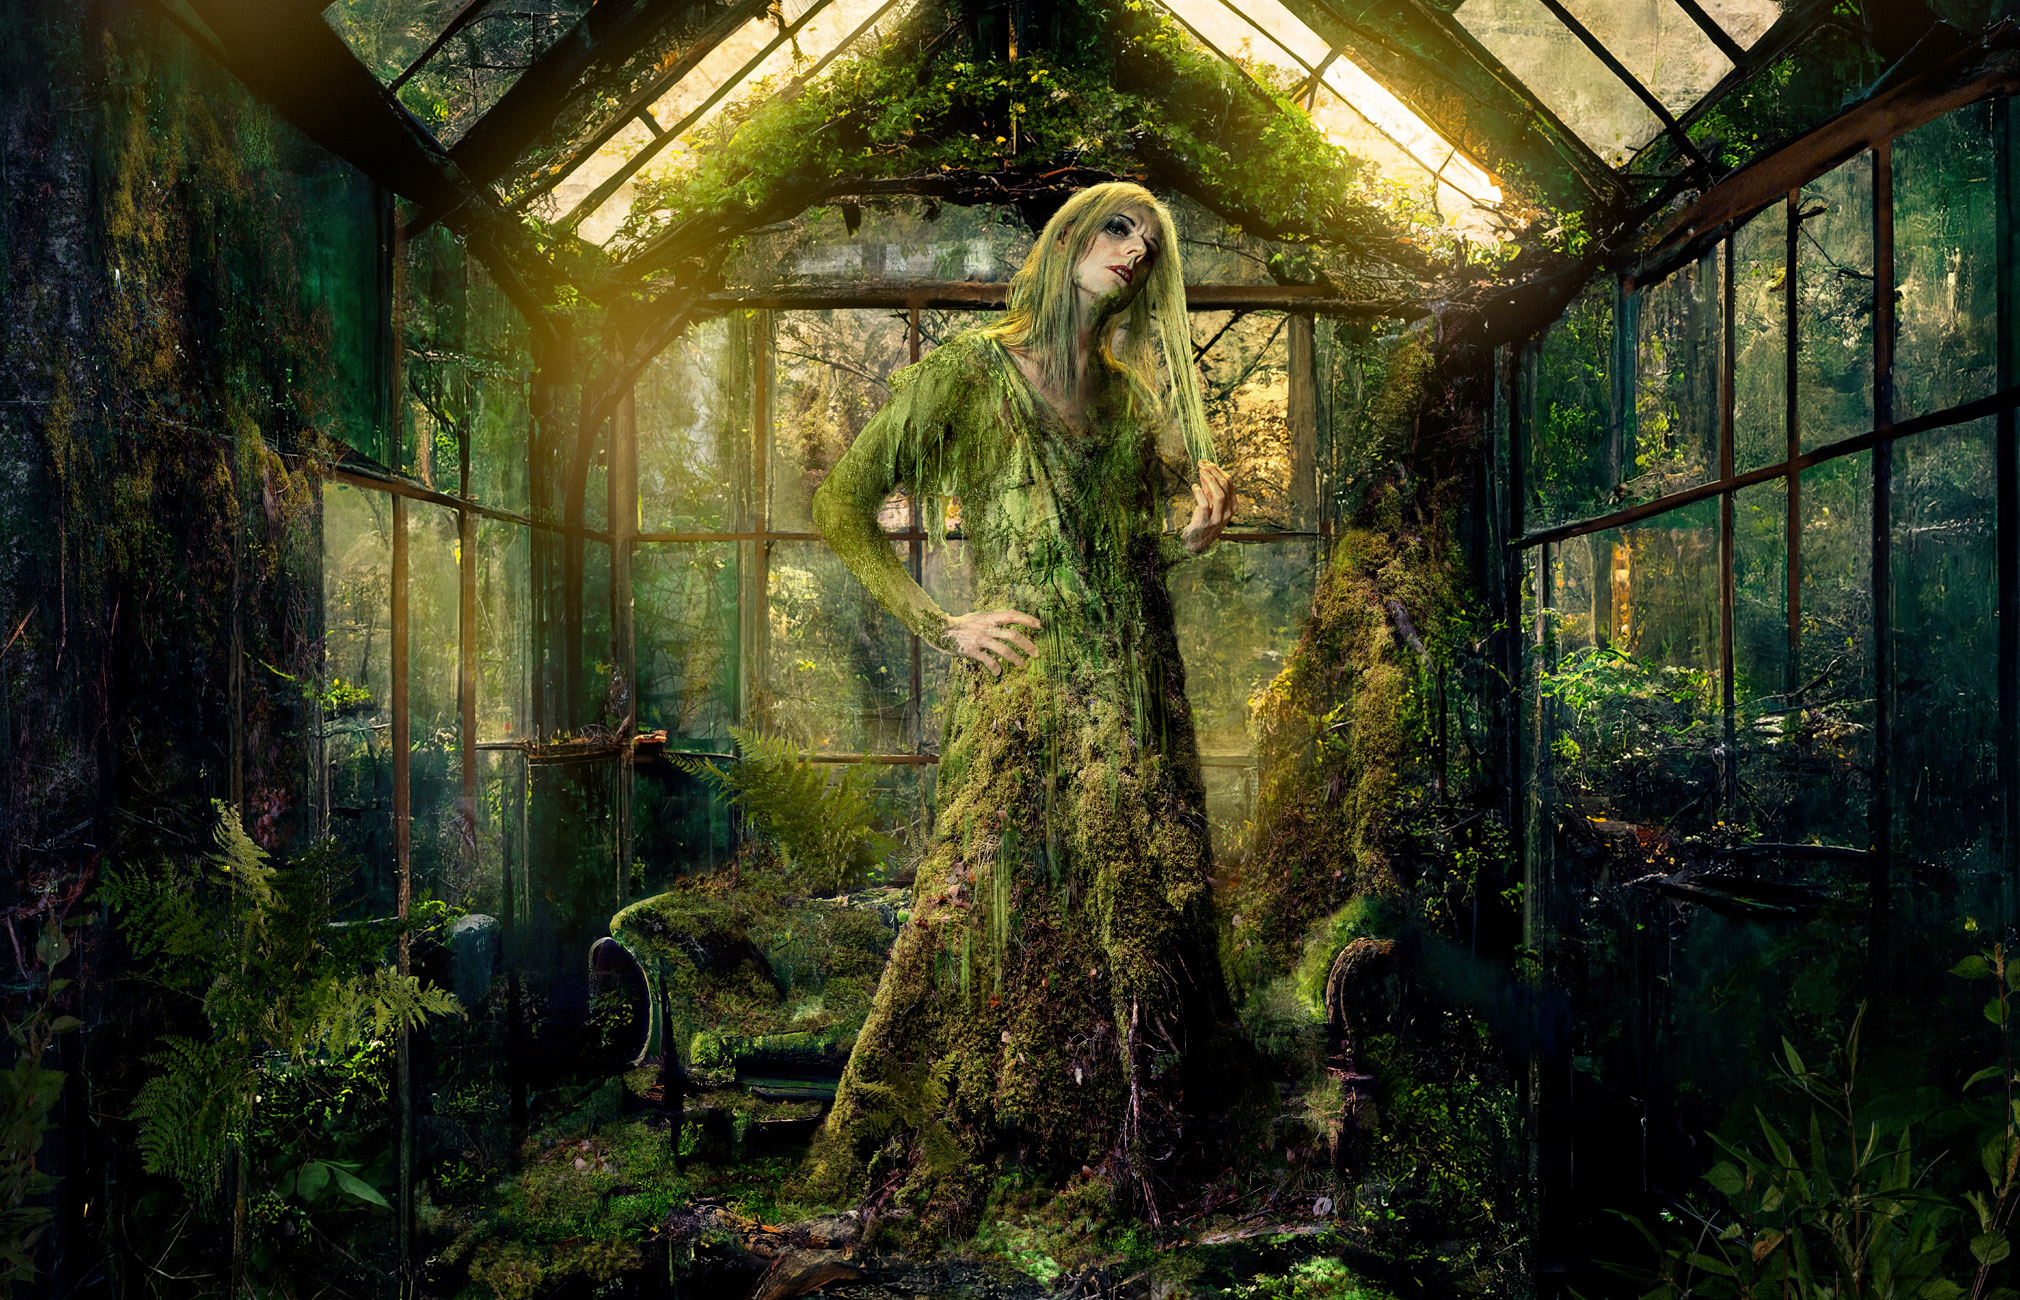 A mysterious and enchanting scene. At the center stands a figure dressed in a gown made from moss and plants. The person is located in an abandoned and decaying greenhouse, which is covered in greenery.